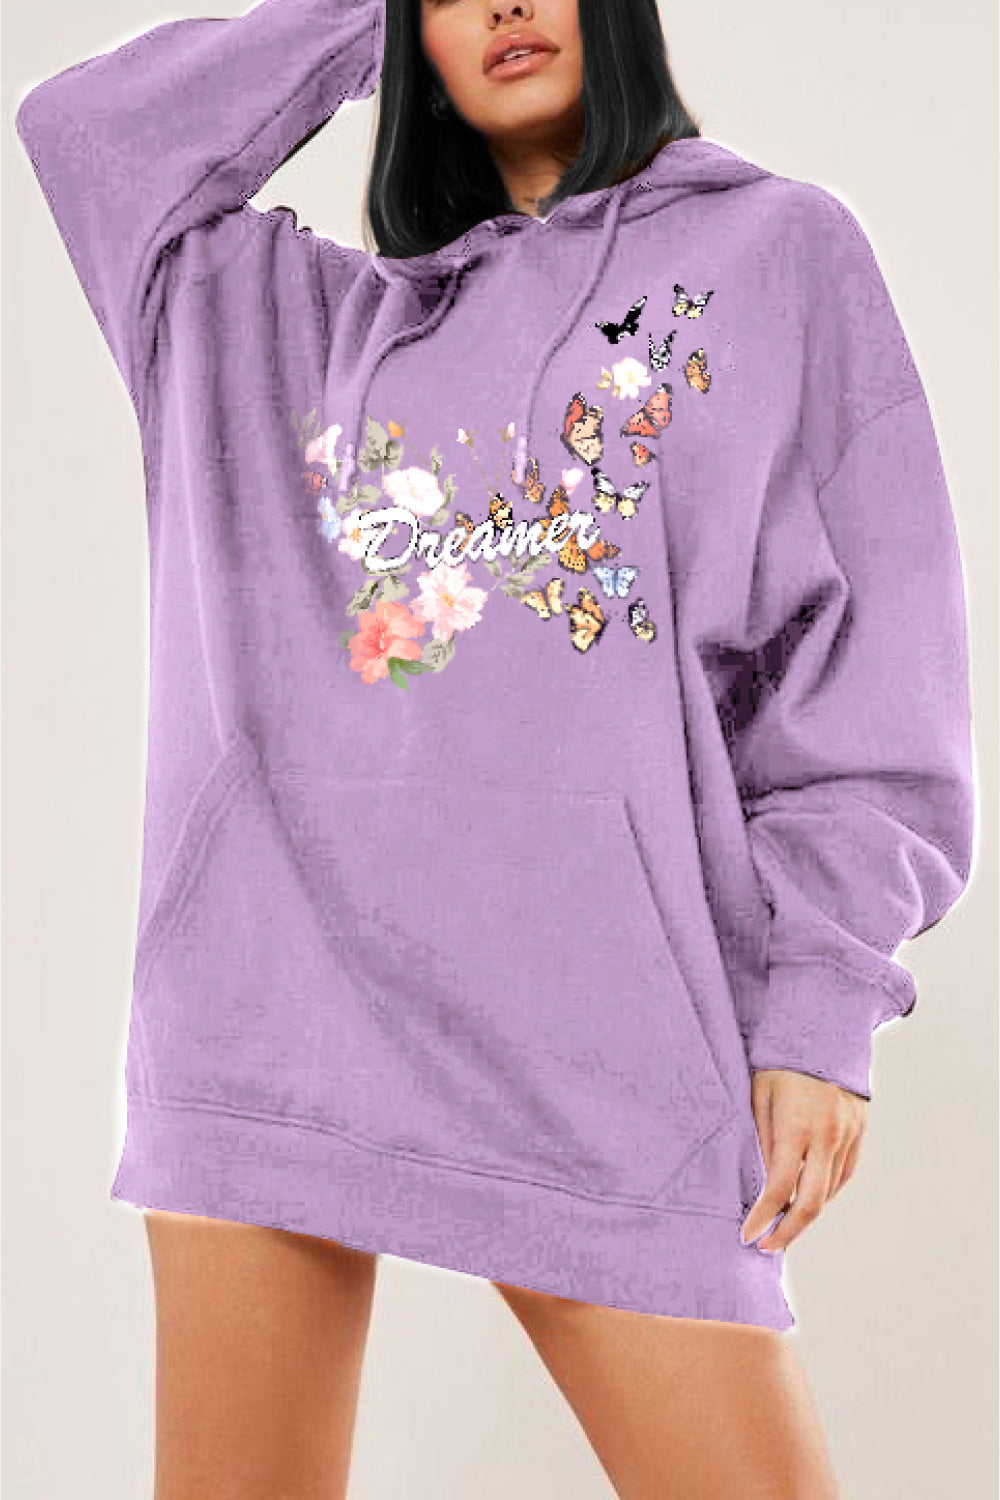 Full Size Dropped Shoulder DREAMER Graphic Hoodie - Women’s Clothing & Accessories - Shirts & Tops - 7 - 2024